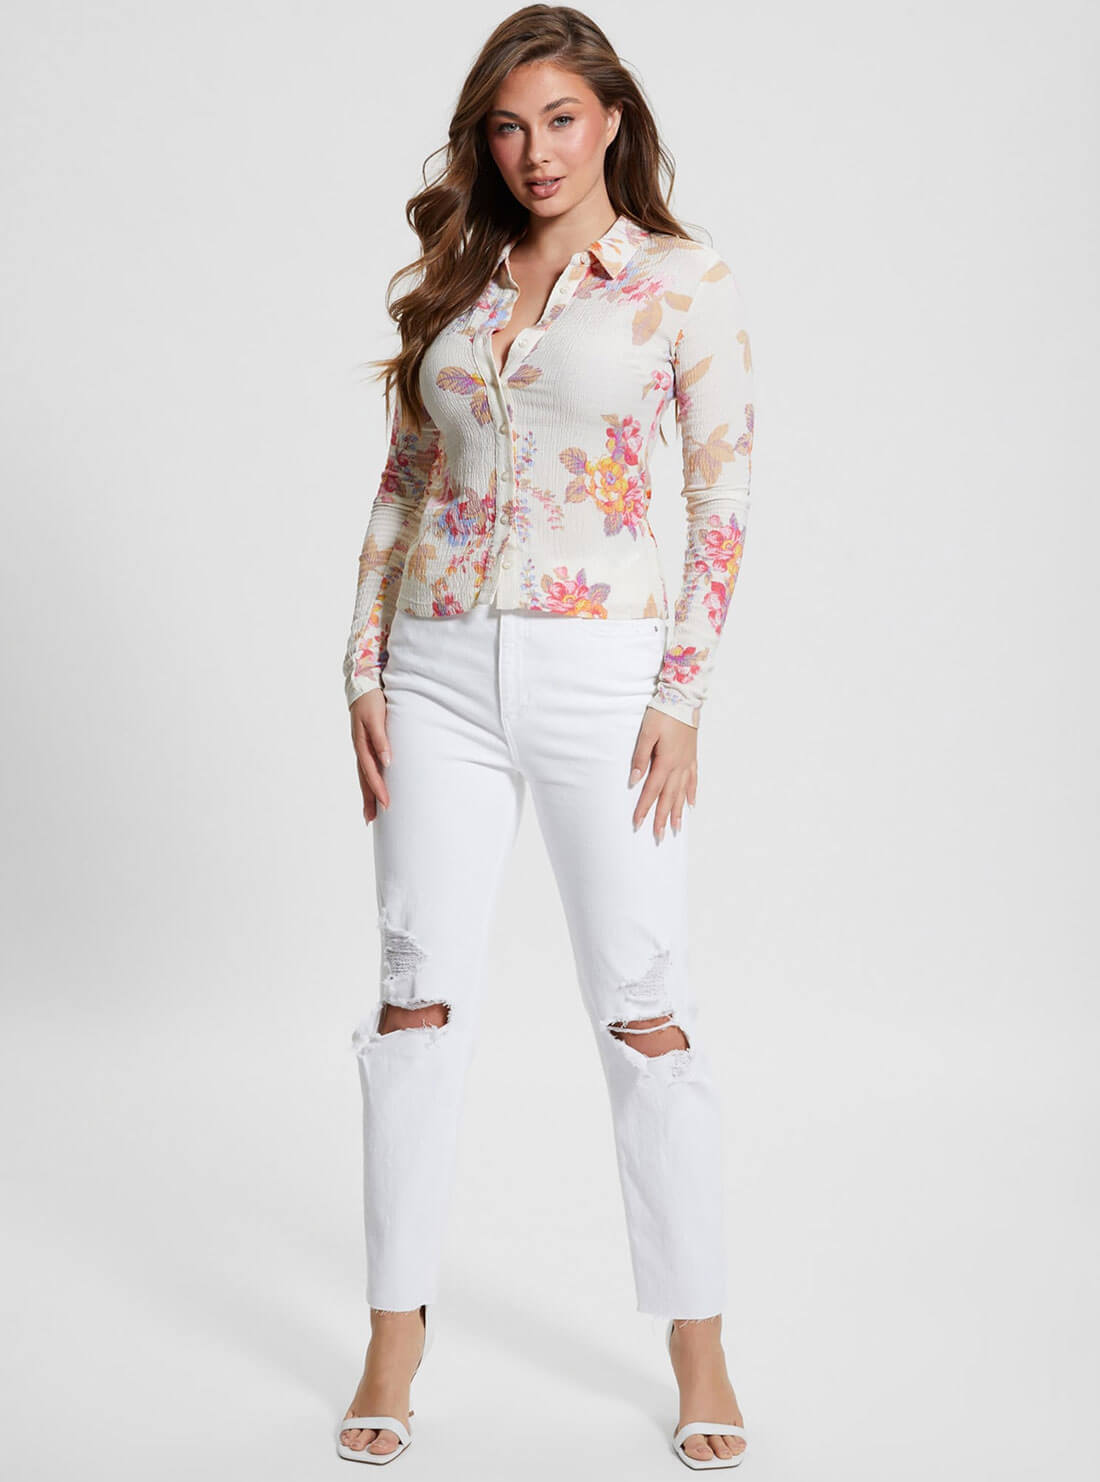 White Floral Tessa Long Sleeve Top | GUESS Women's Apparel | full view